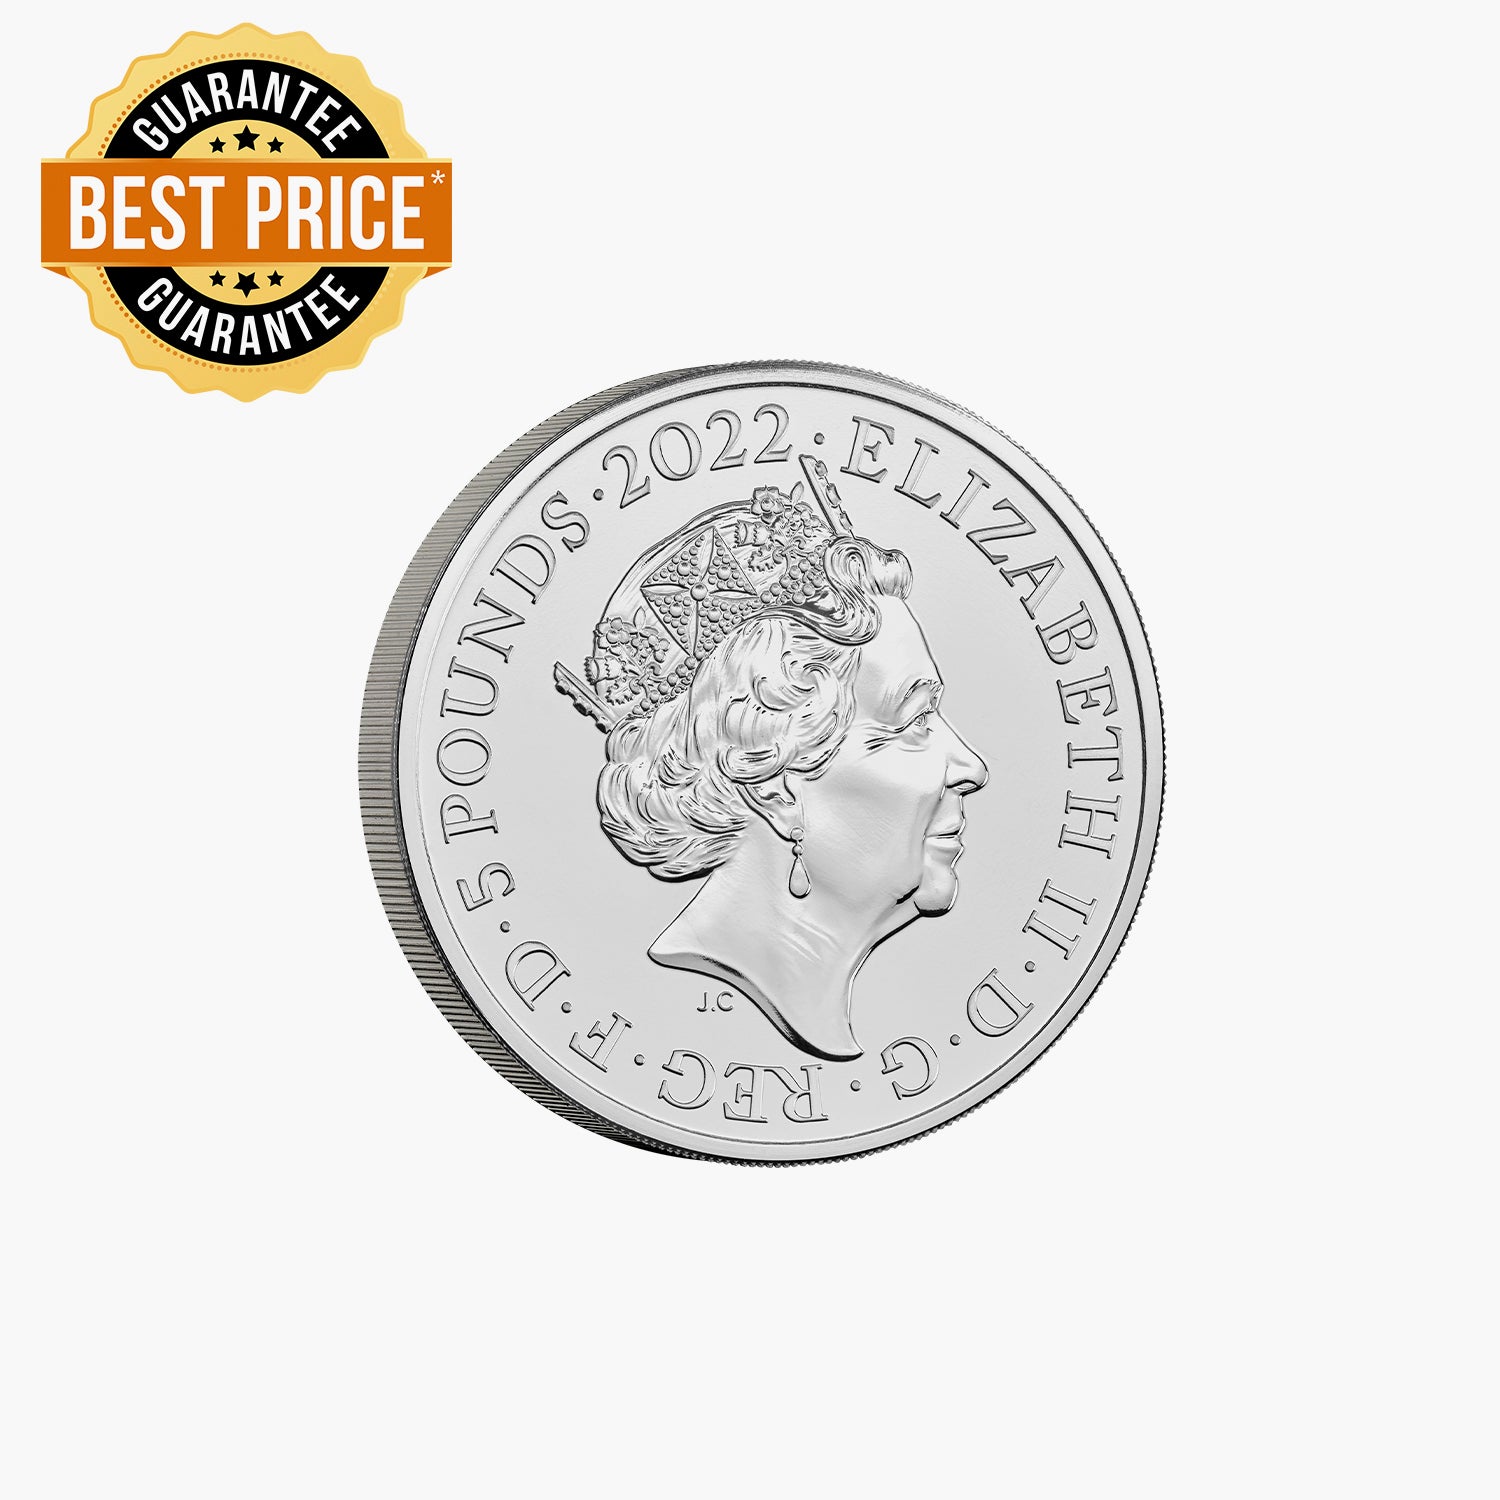 The Official Queens Reign Charity & Patronage 2022 UK £5 BU Coin